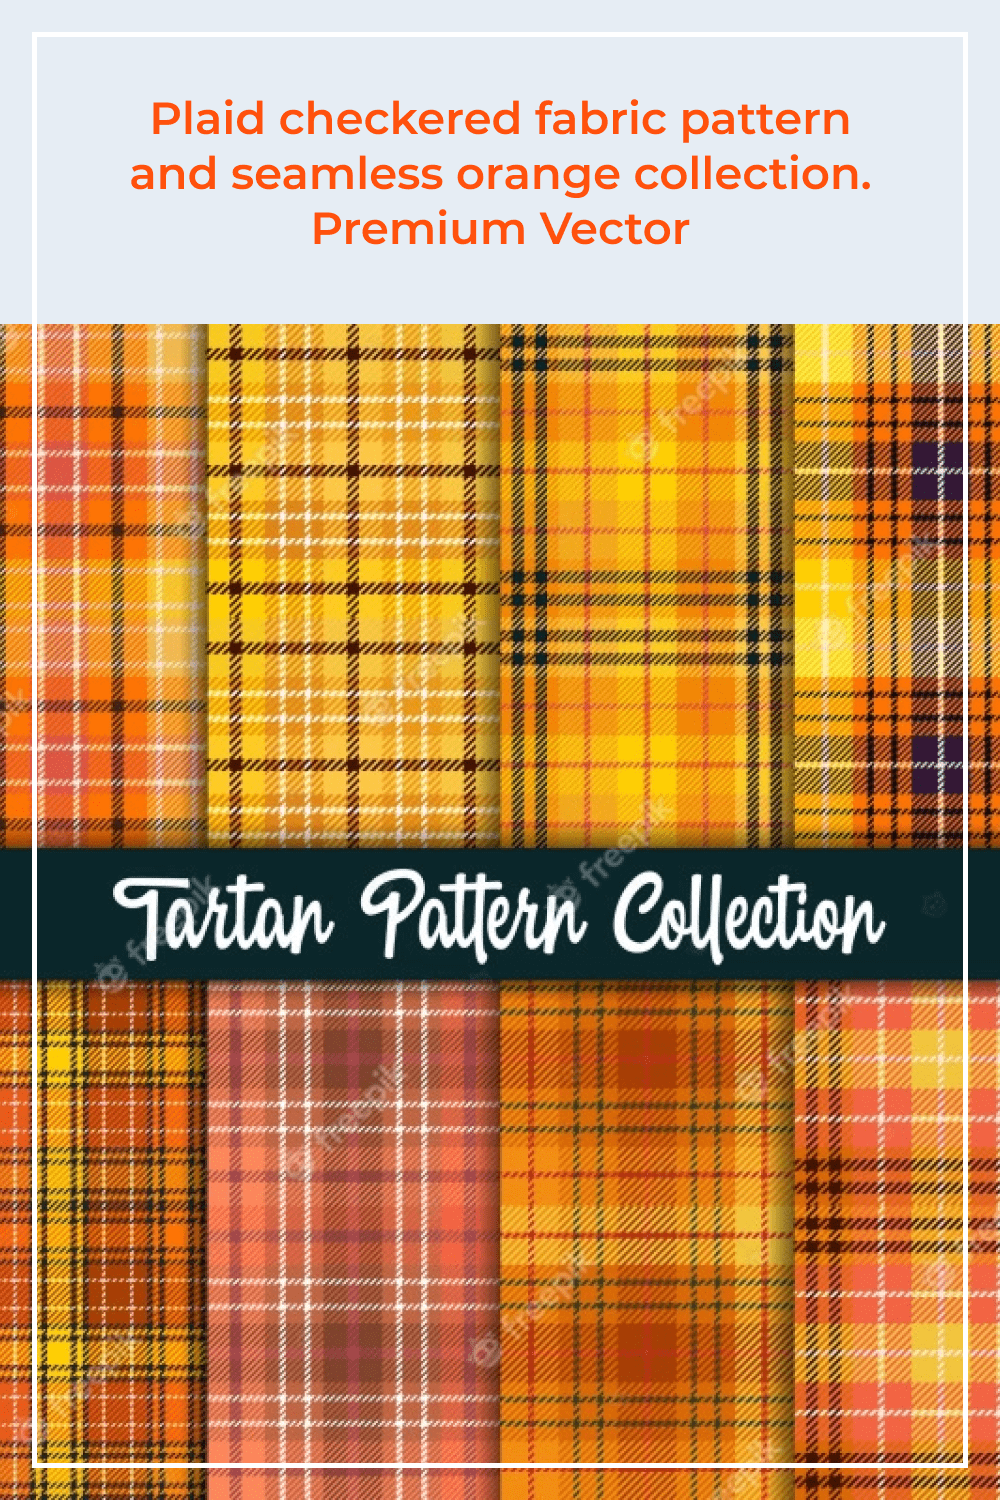 Plaid checkered fabric pattern and seamless orange collection.